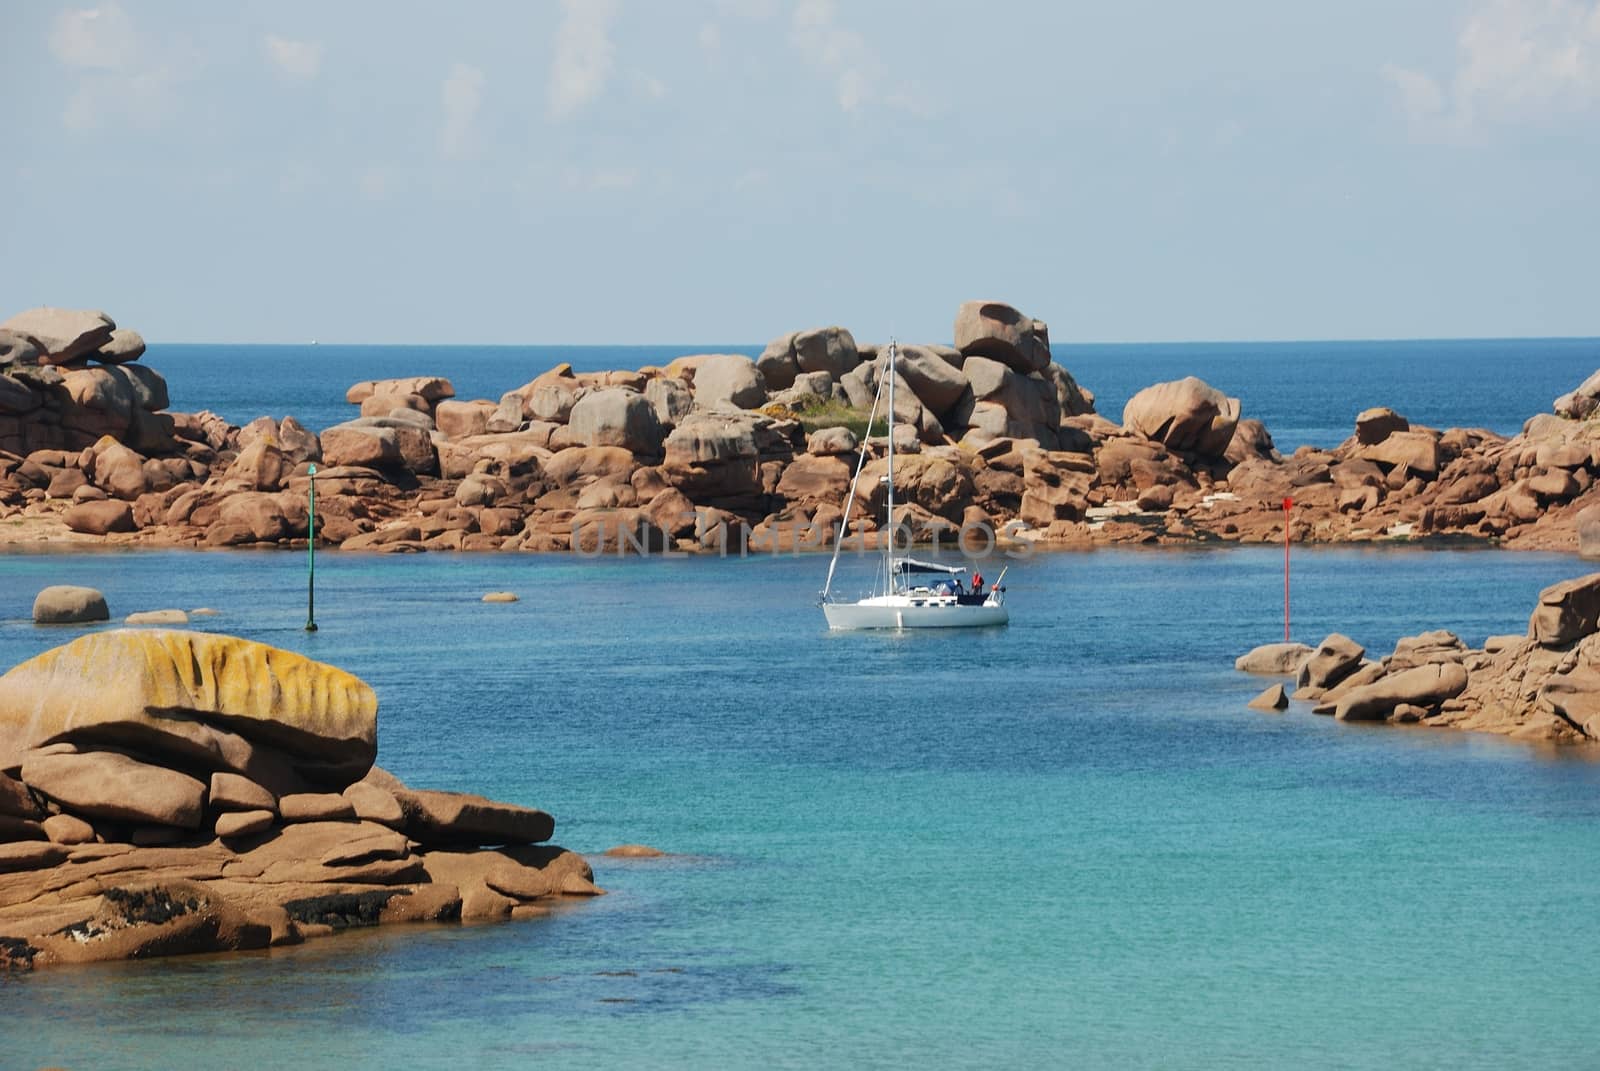  Cotes-d'Armor, Ploumanach rocks on the Pink Granite Coast in Perros-Guirec.